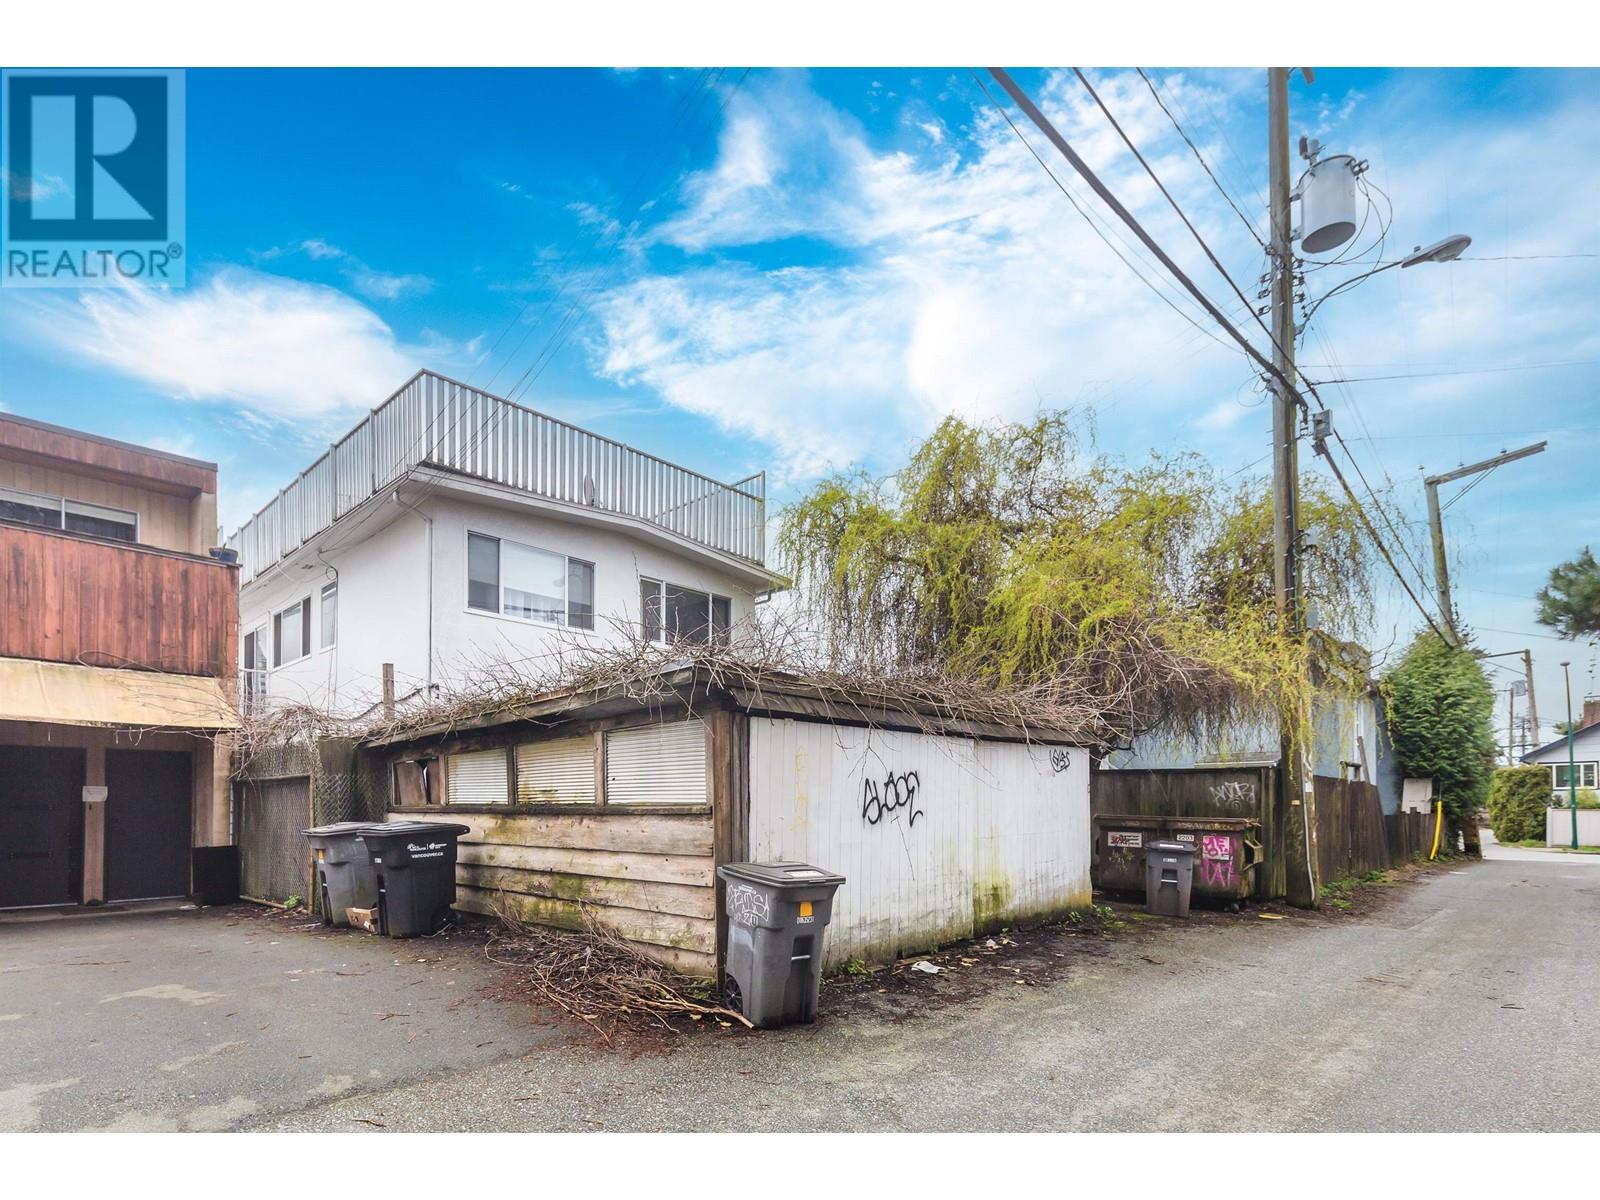 Listing Picture 4 of 4 : 3173 WEST BROADWAY, Vancouver / 溫哥華 - 魯藝地產 Yvonne Lu Group - MLS Medallion Club Member